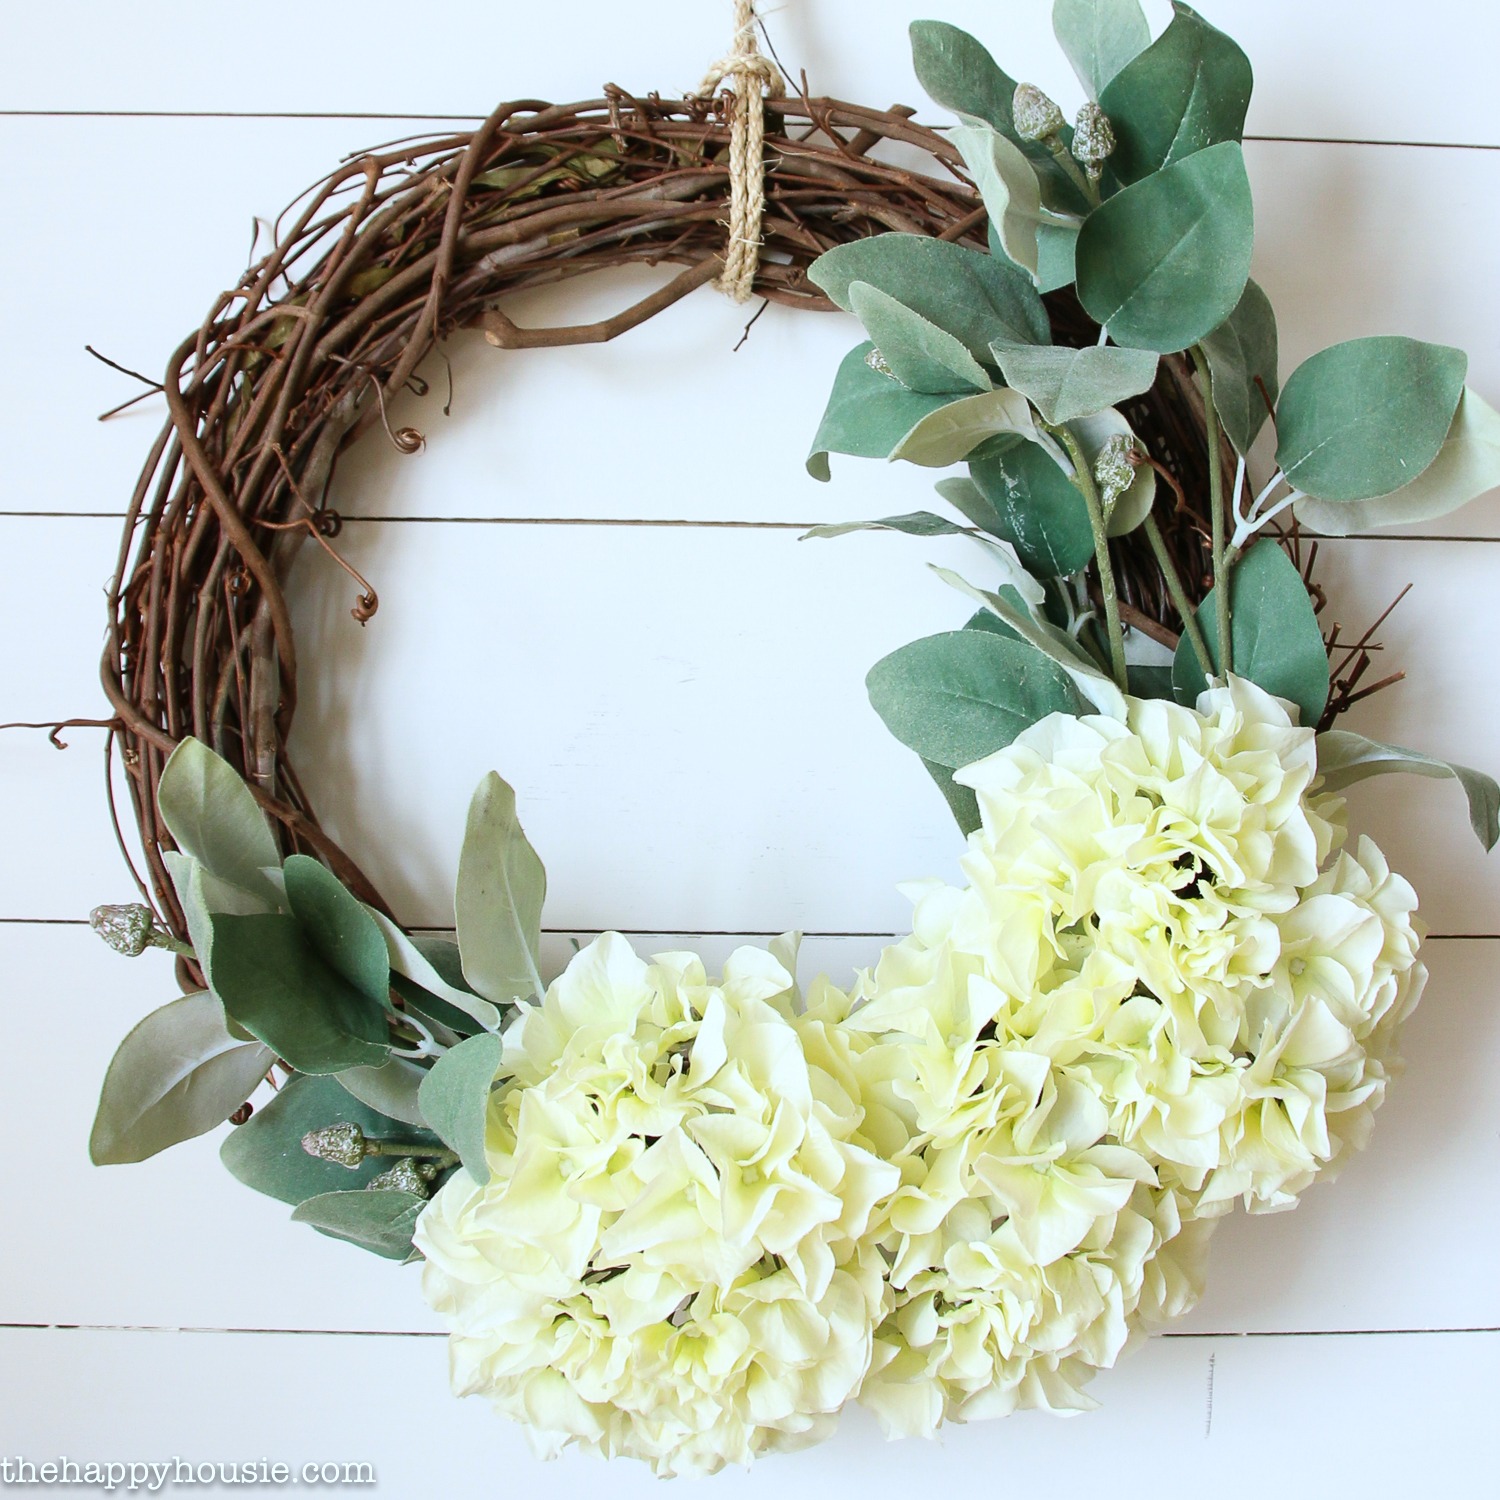 A grapevine wreath with white large flowers and eucalyptus leaves on it.